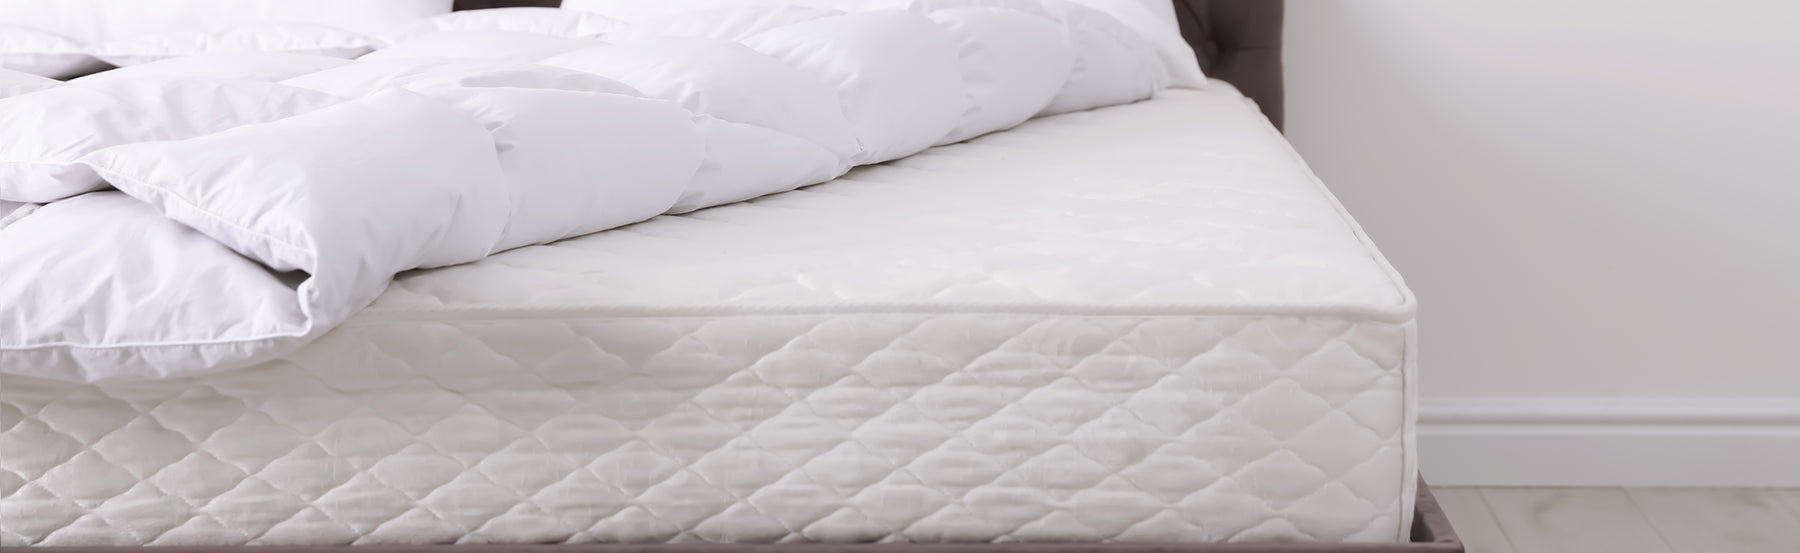 How to Extend the Life Expectancy of Your Mattress